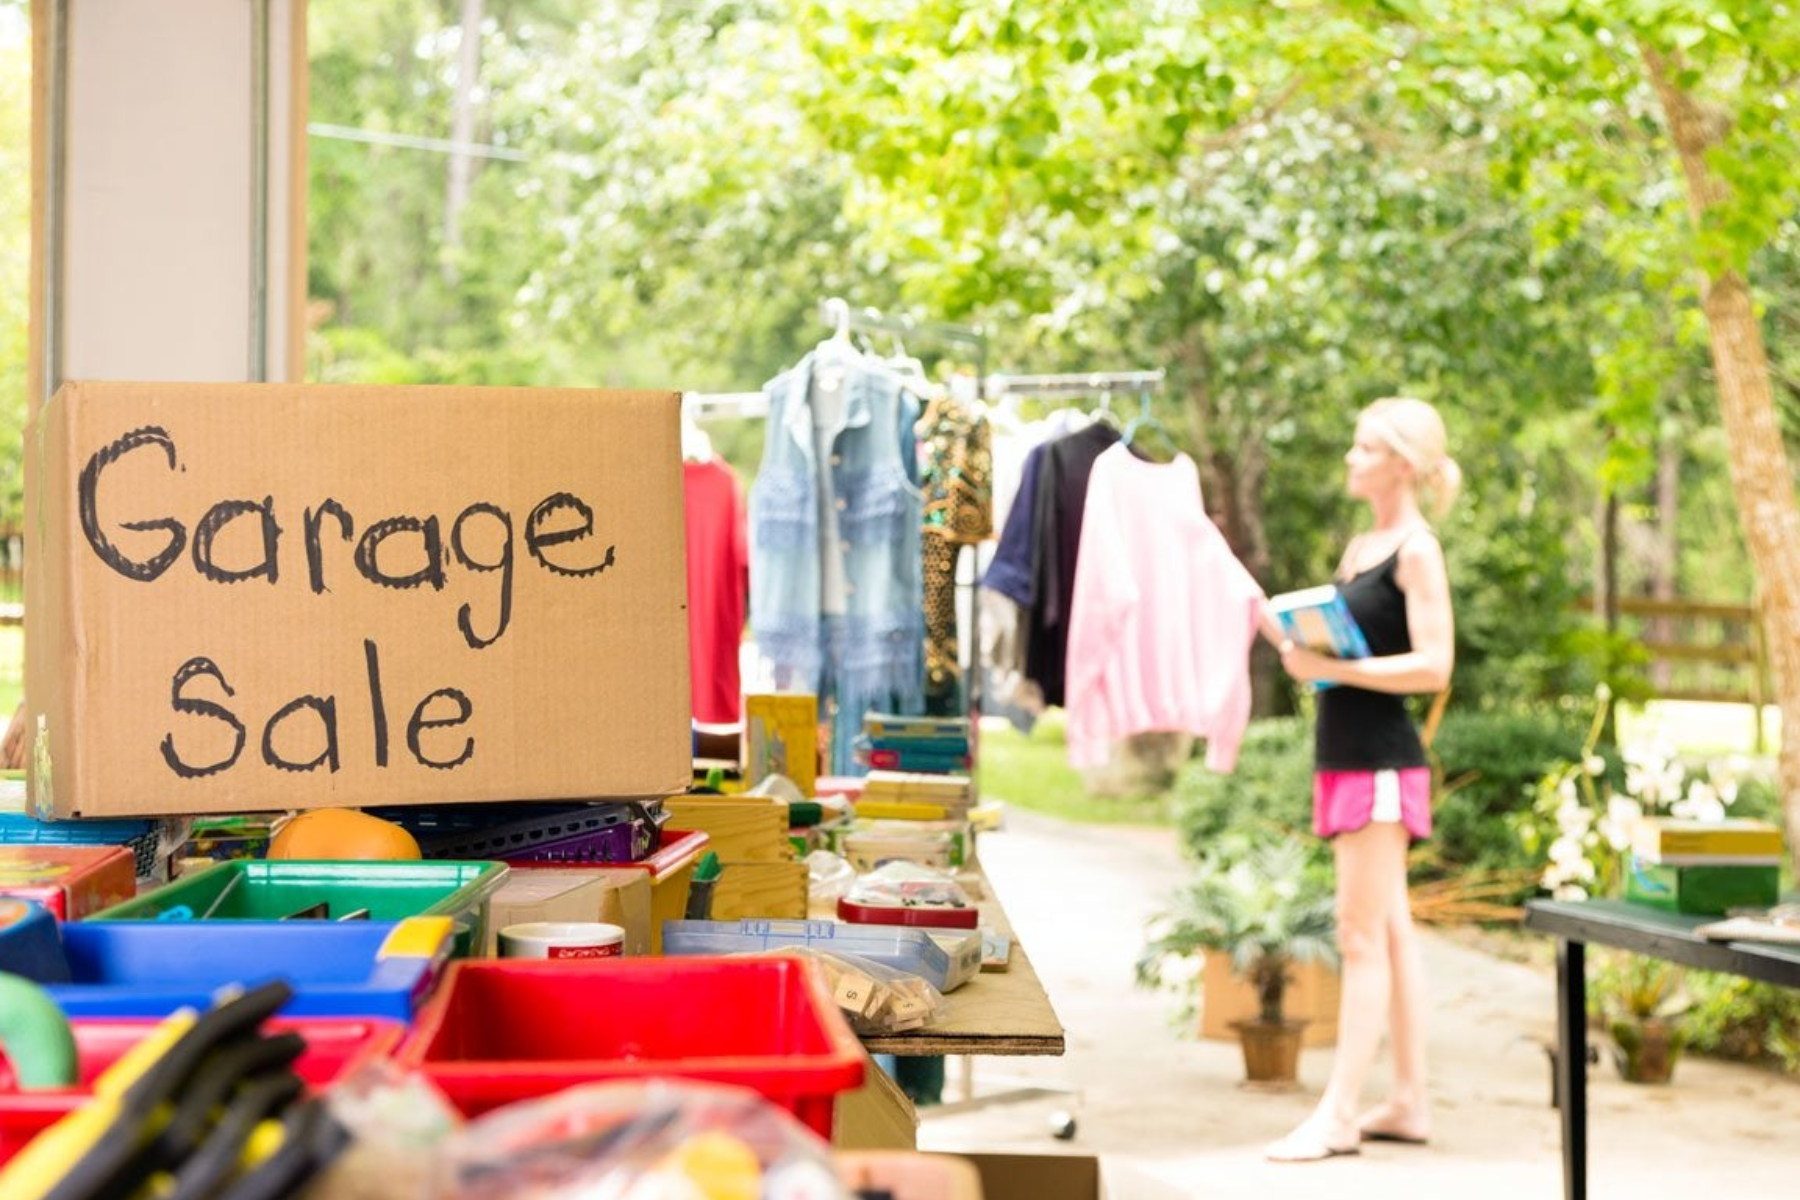 A woman is arranging the clothes for her garage sale